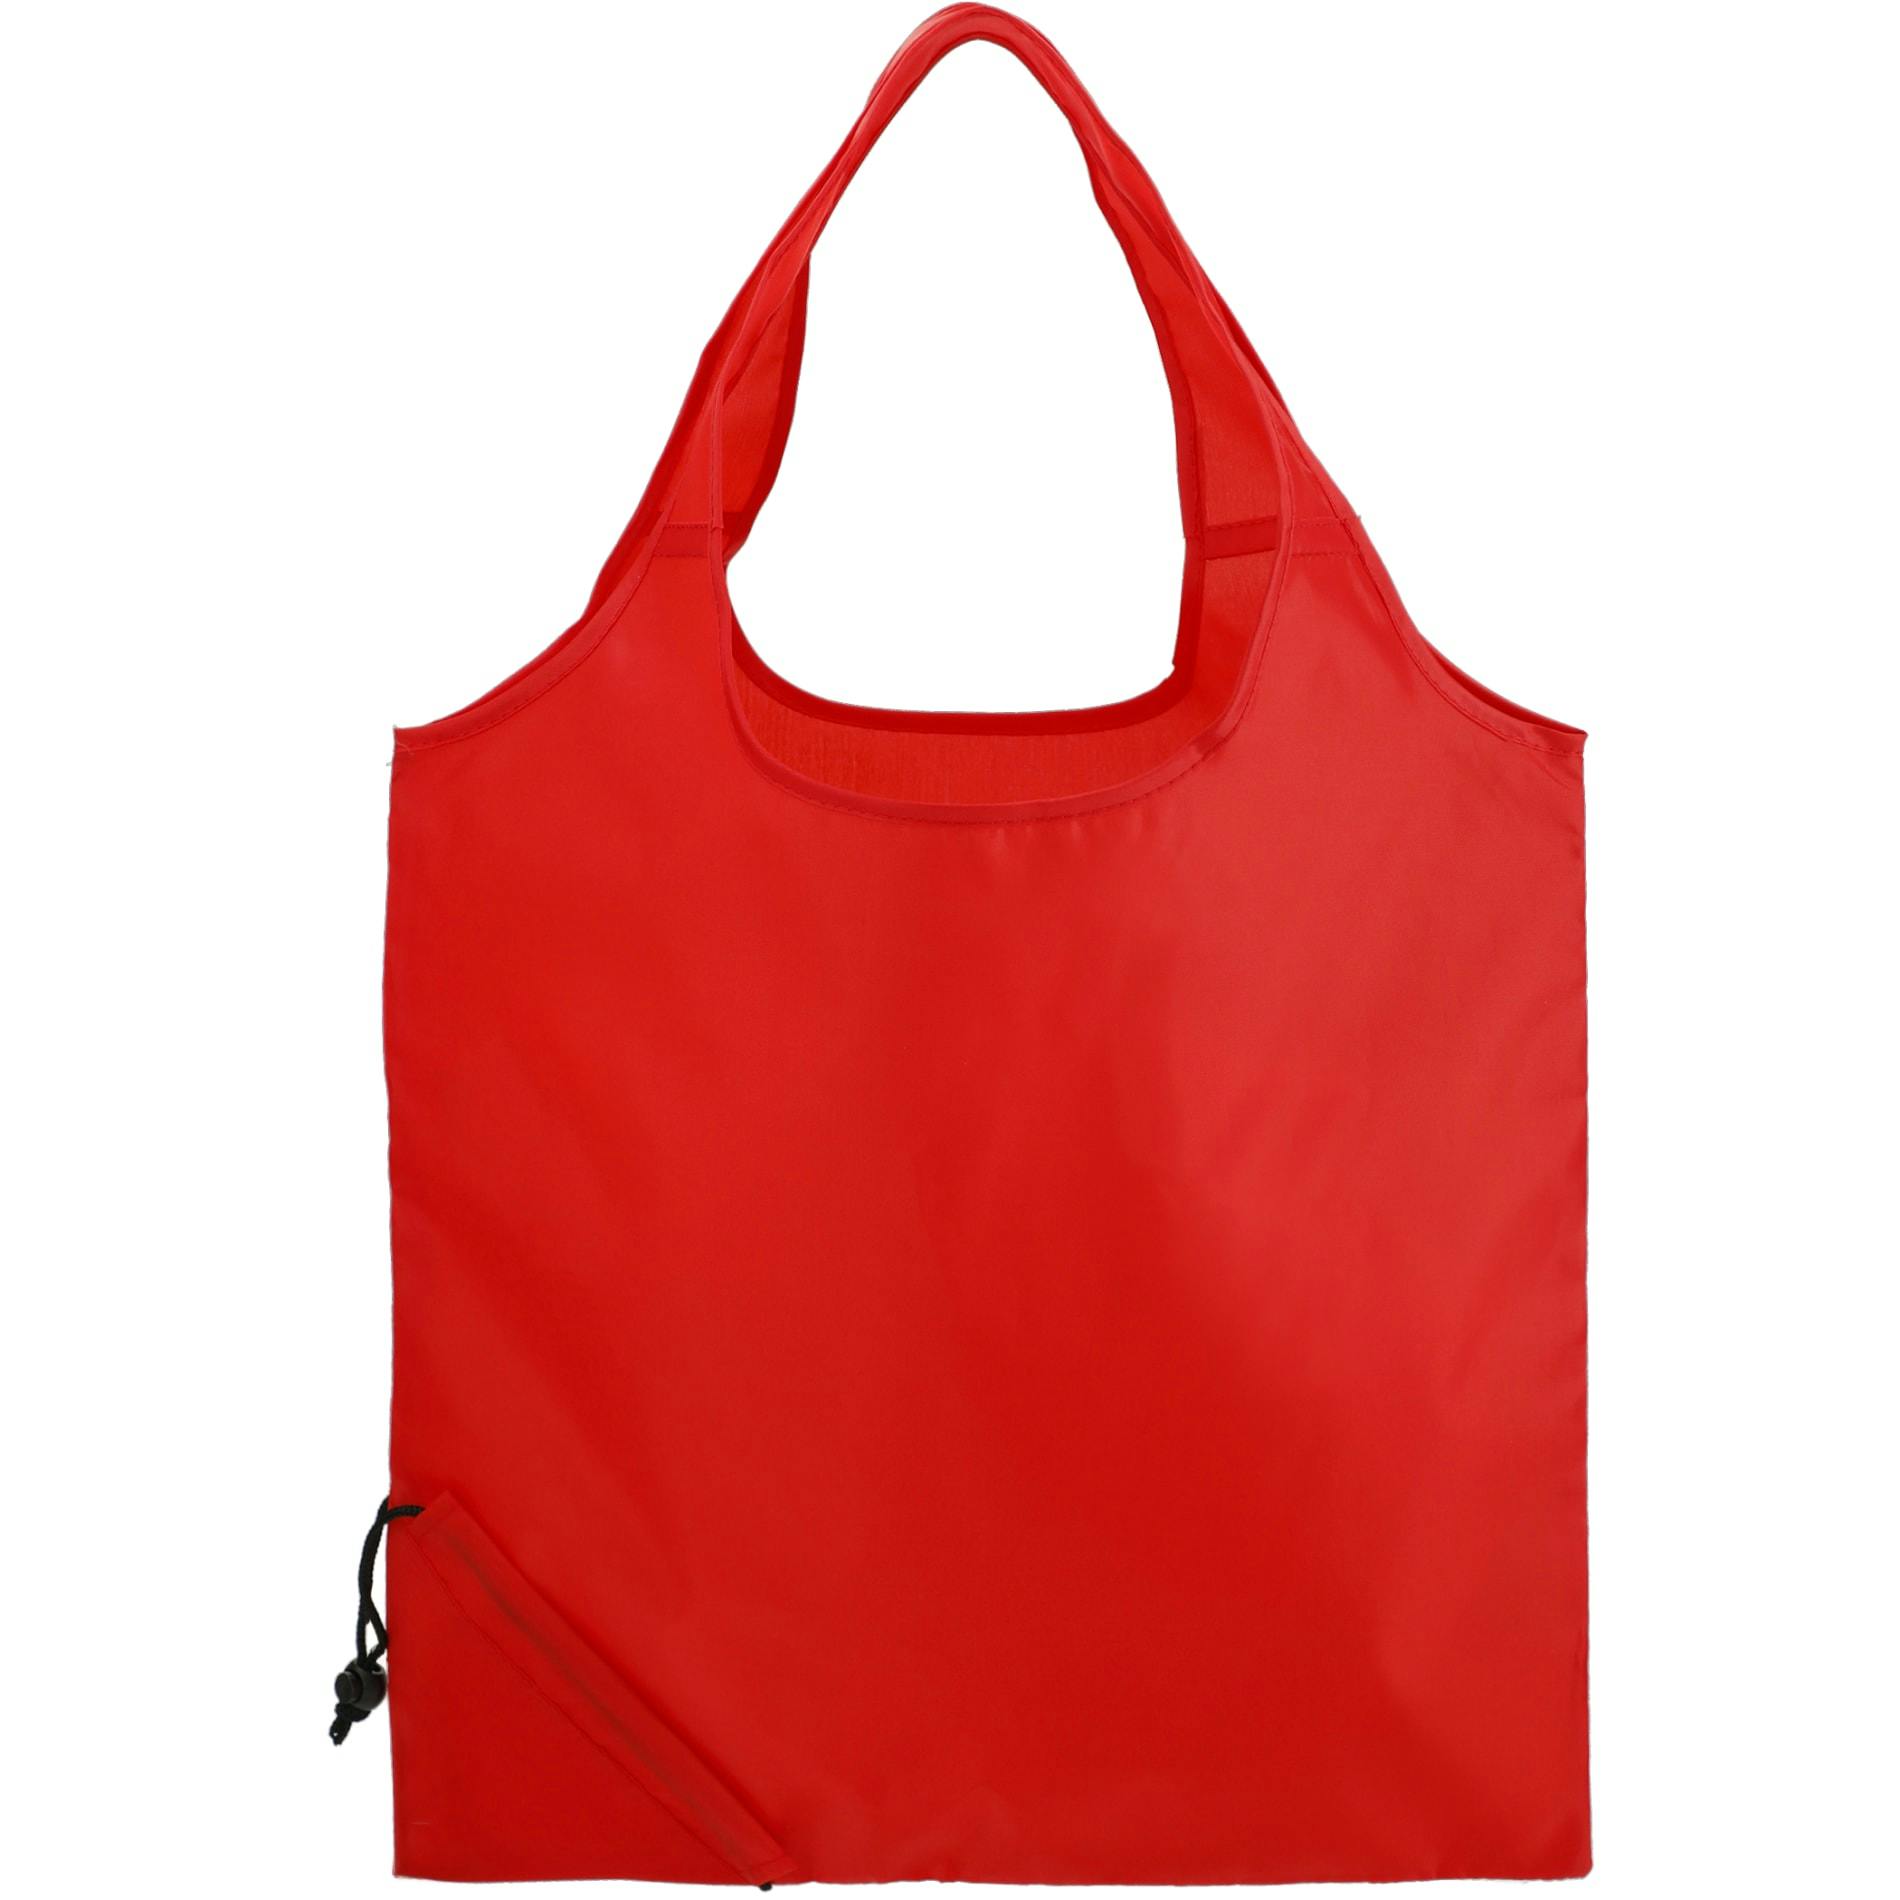 Bungalow RPET Foldable Shopper Tote - additional Image 4